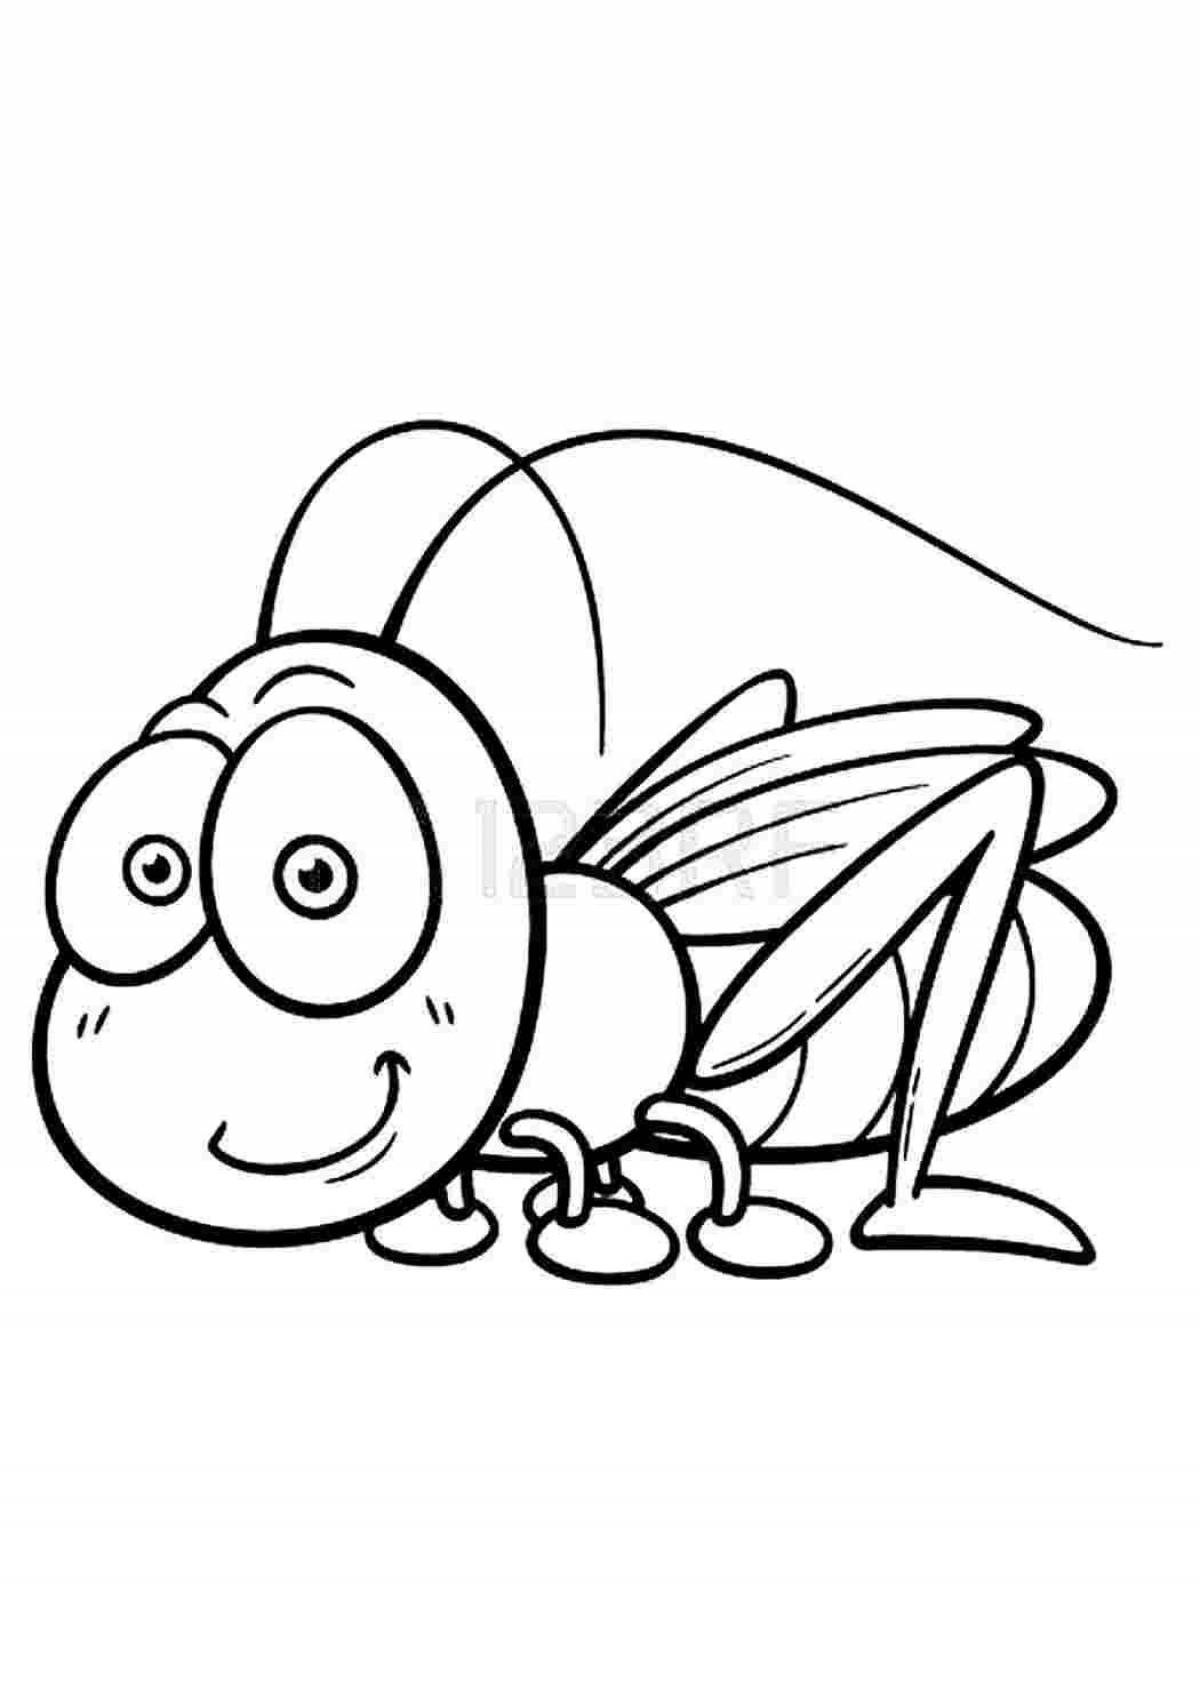 Interesting cricket coloring page